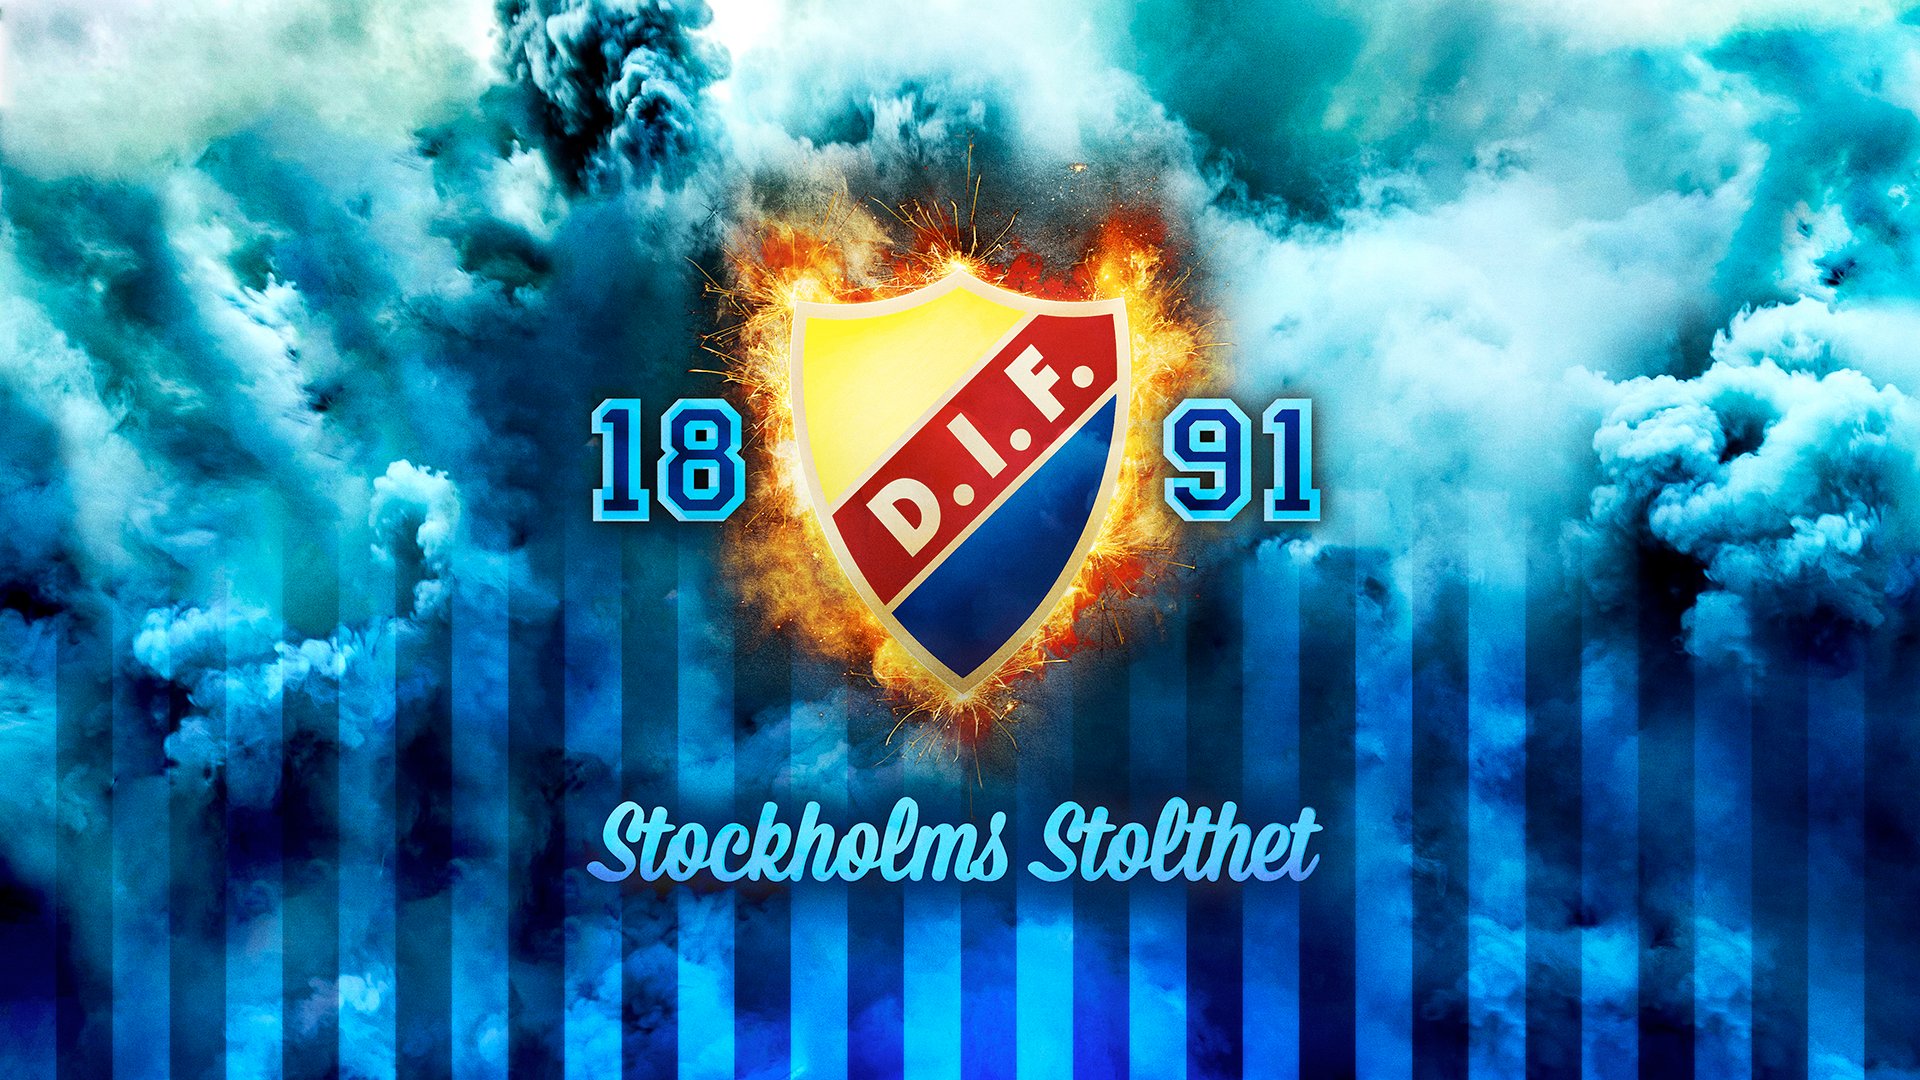 DIF 1891 Stockholms Stolthet Blue Pyro Full HD